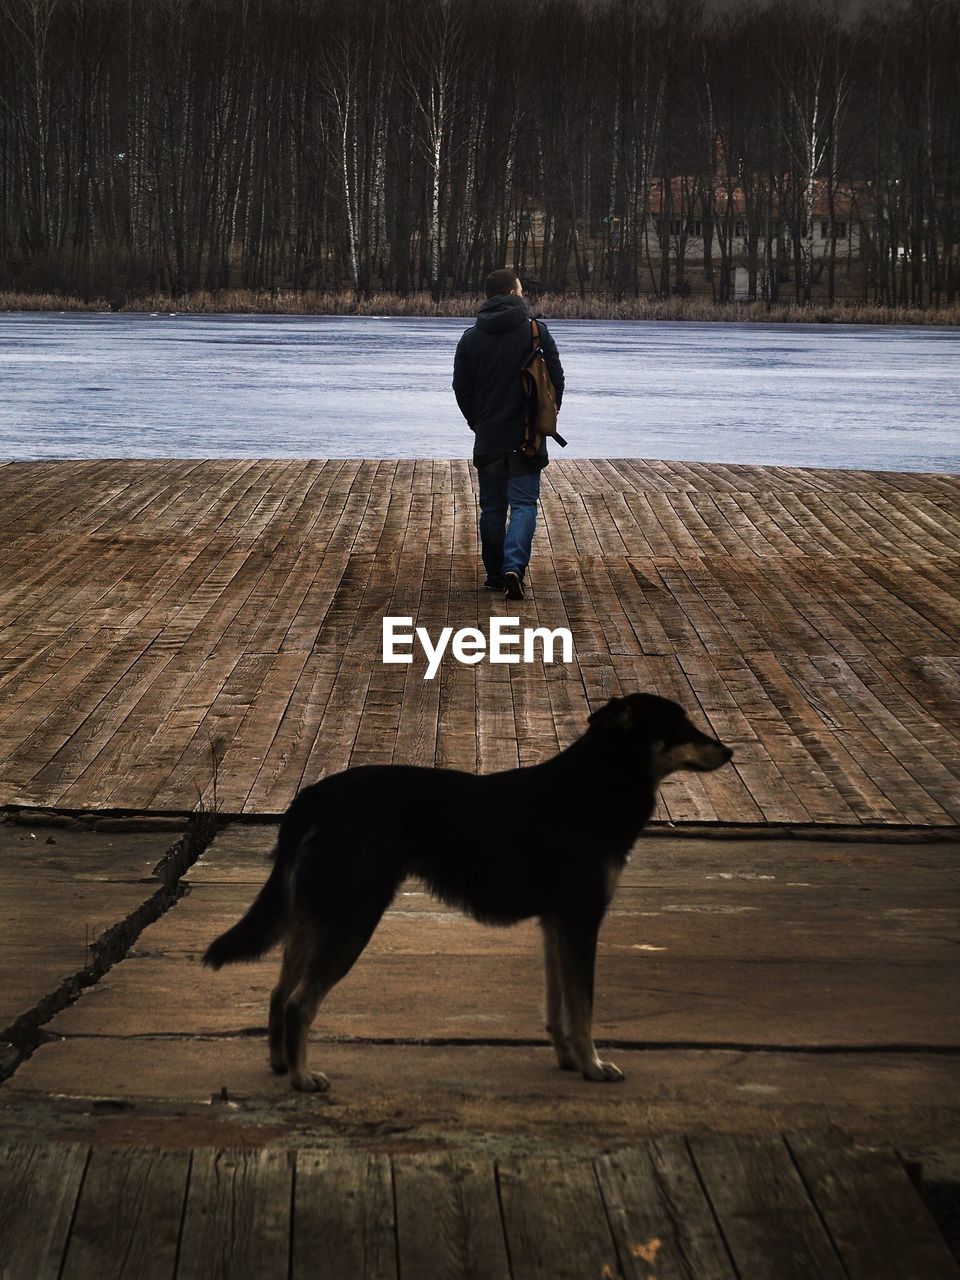 Man and dog on jetty in winter